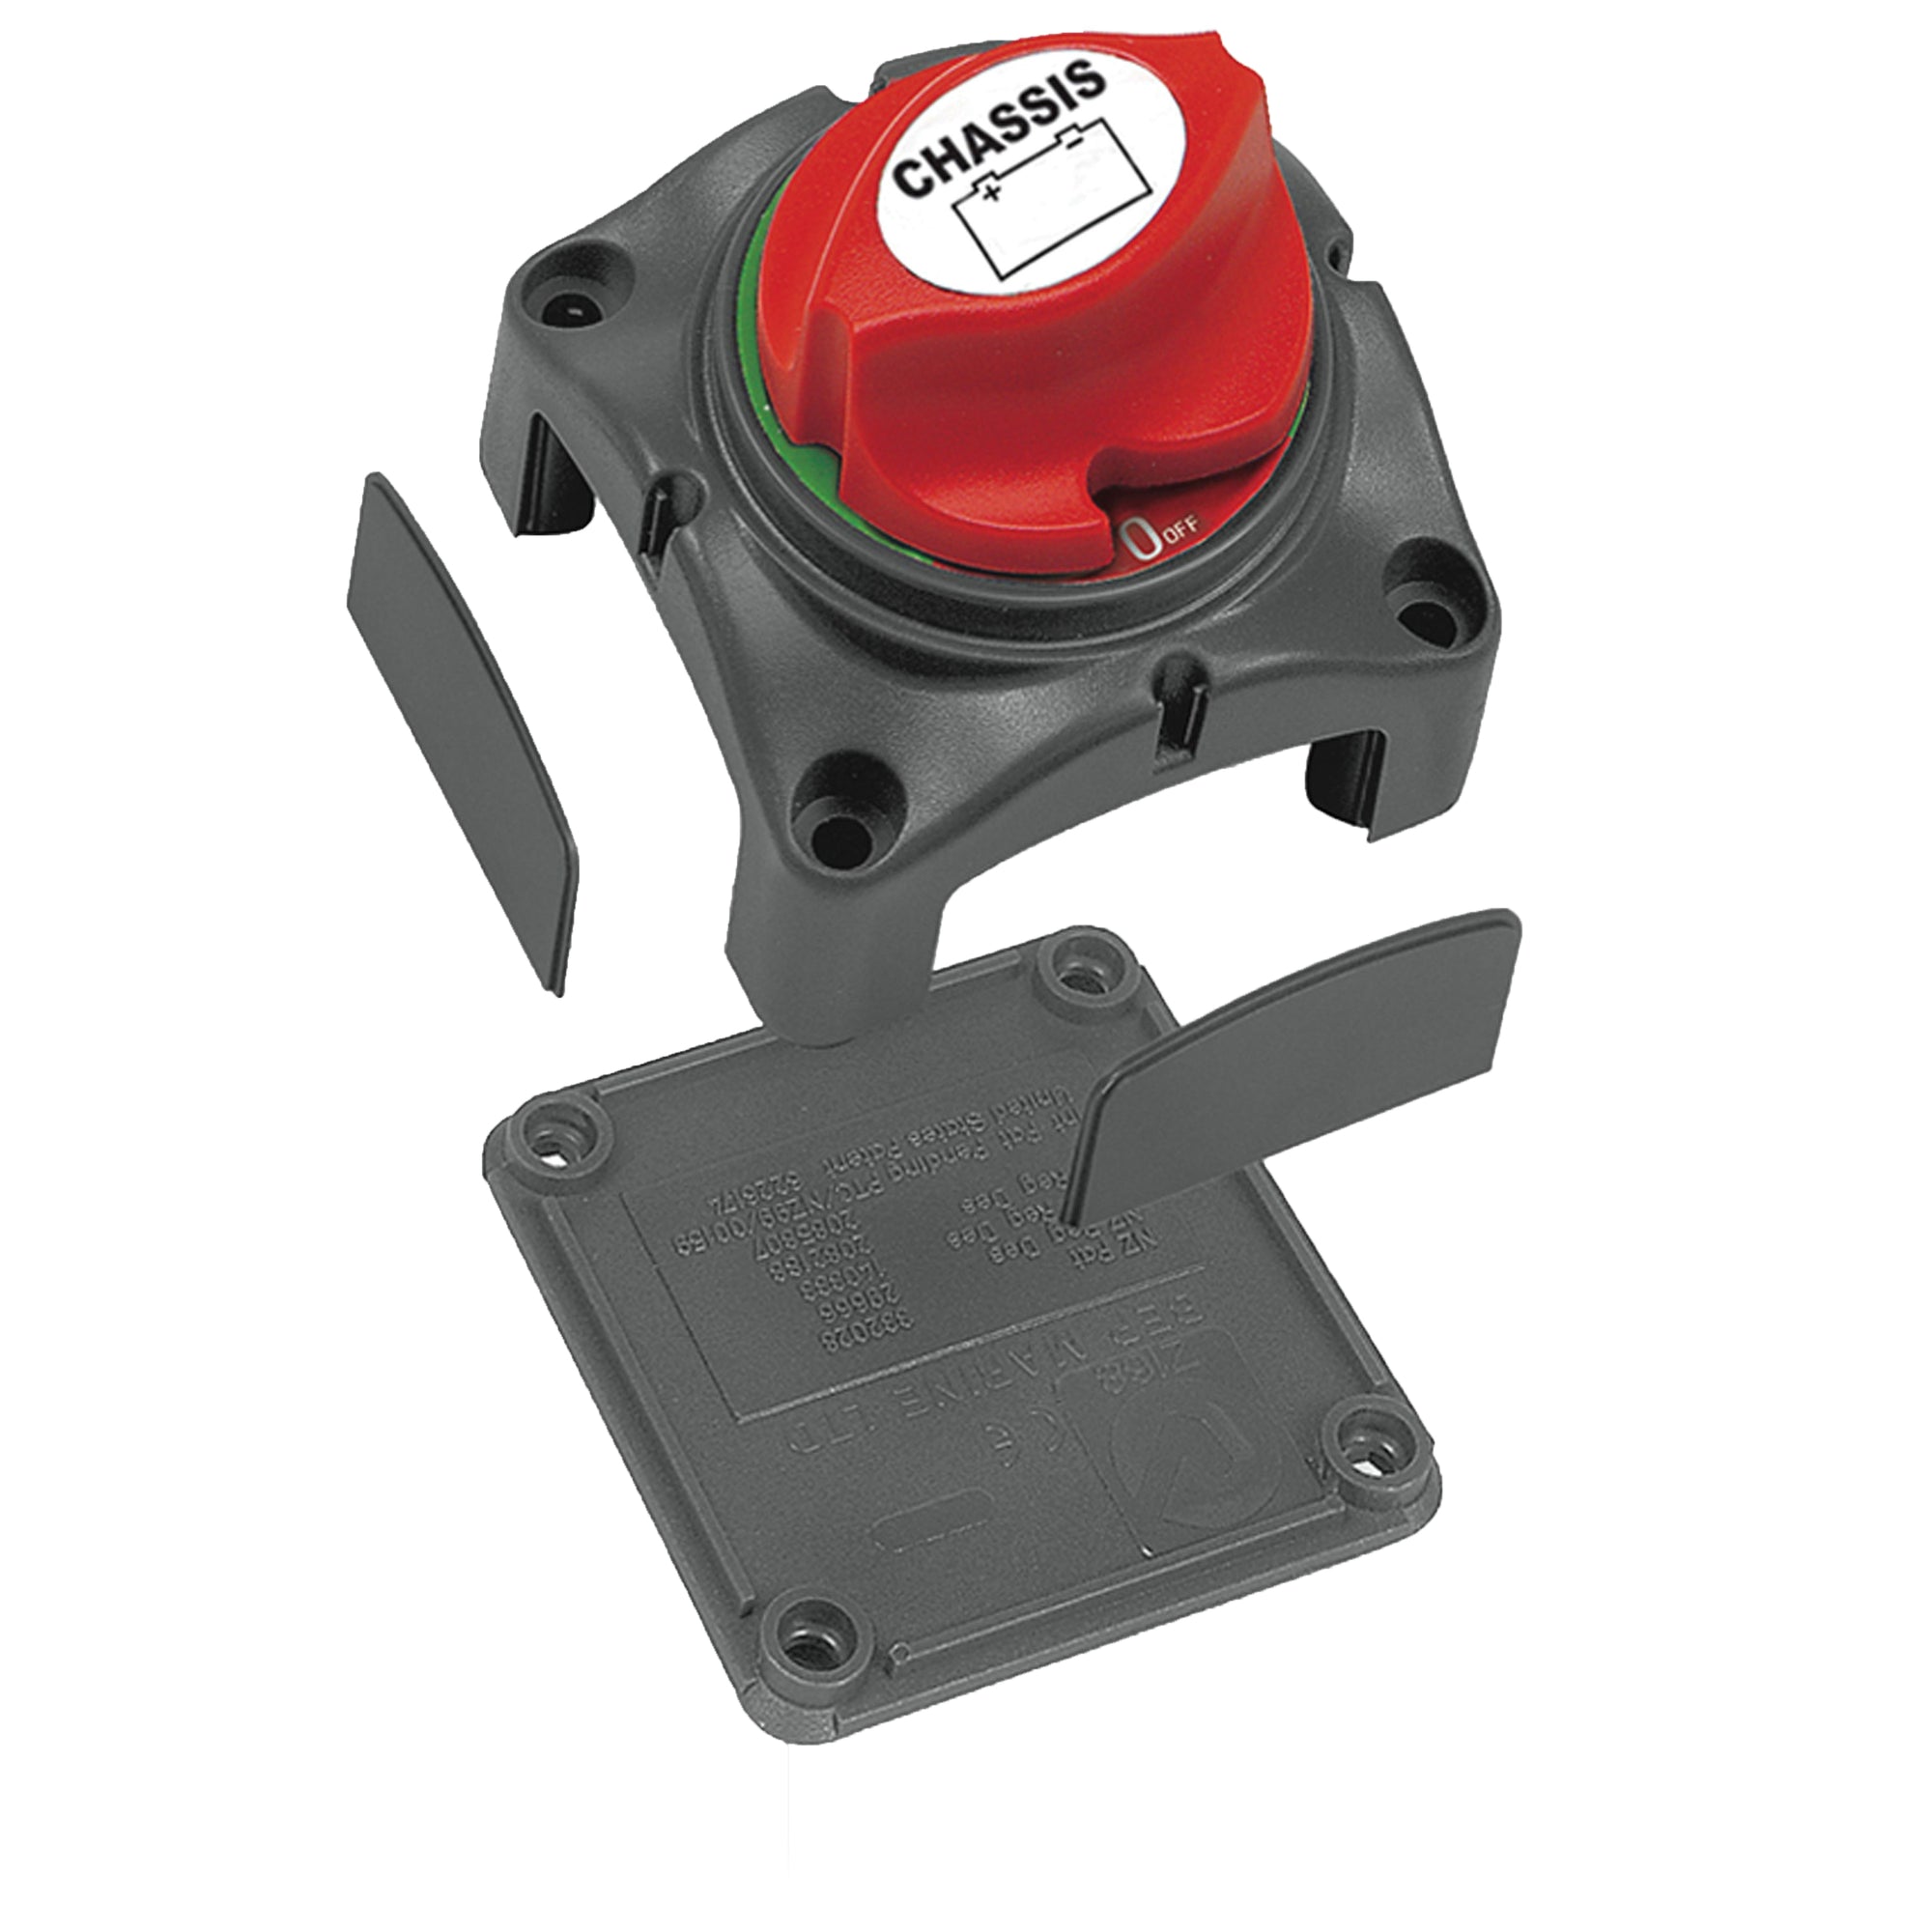 ParkPower 701CHRV Contour Battery Master Switch